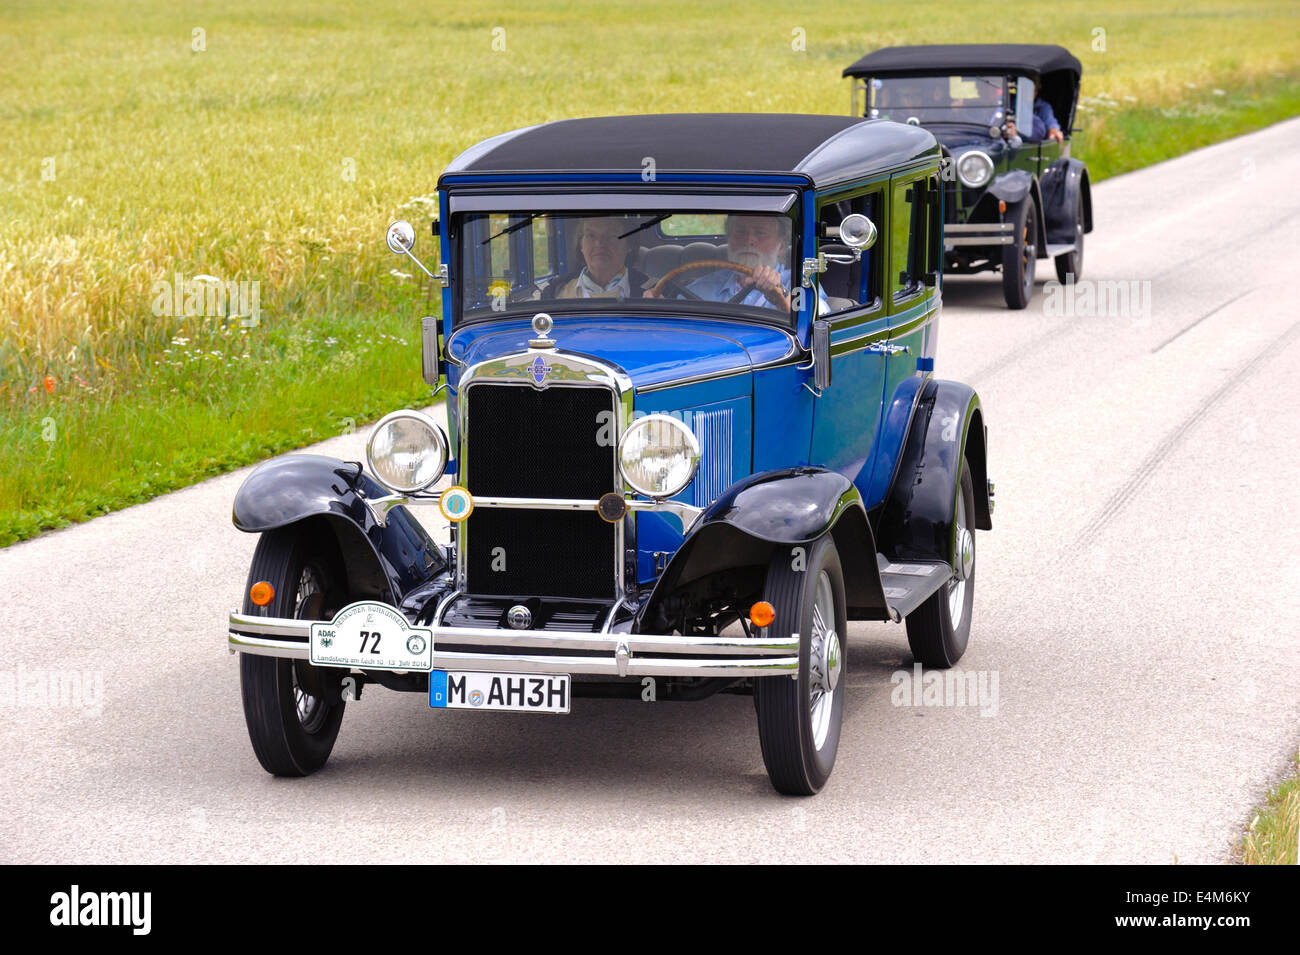 Public rally organized by Bavarian city Landsberg for at least 80 years old veteran cars. Stock Photo